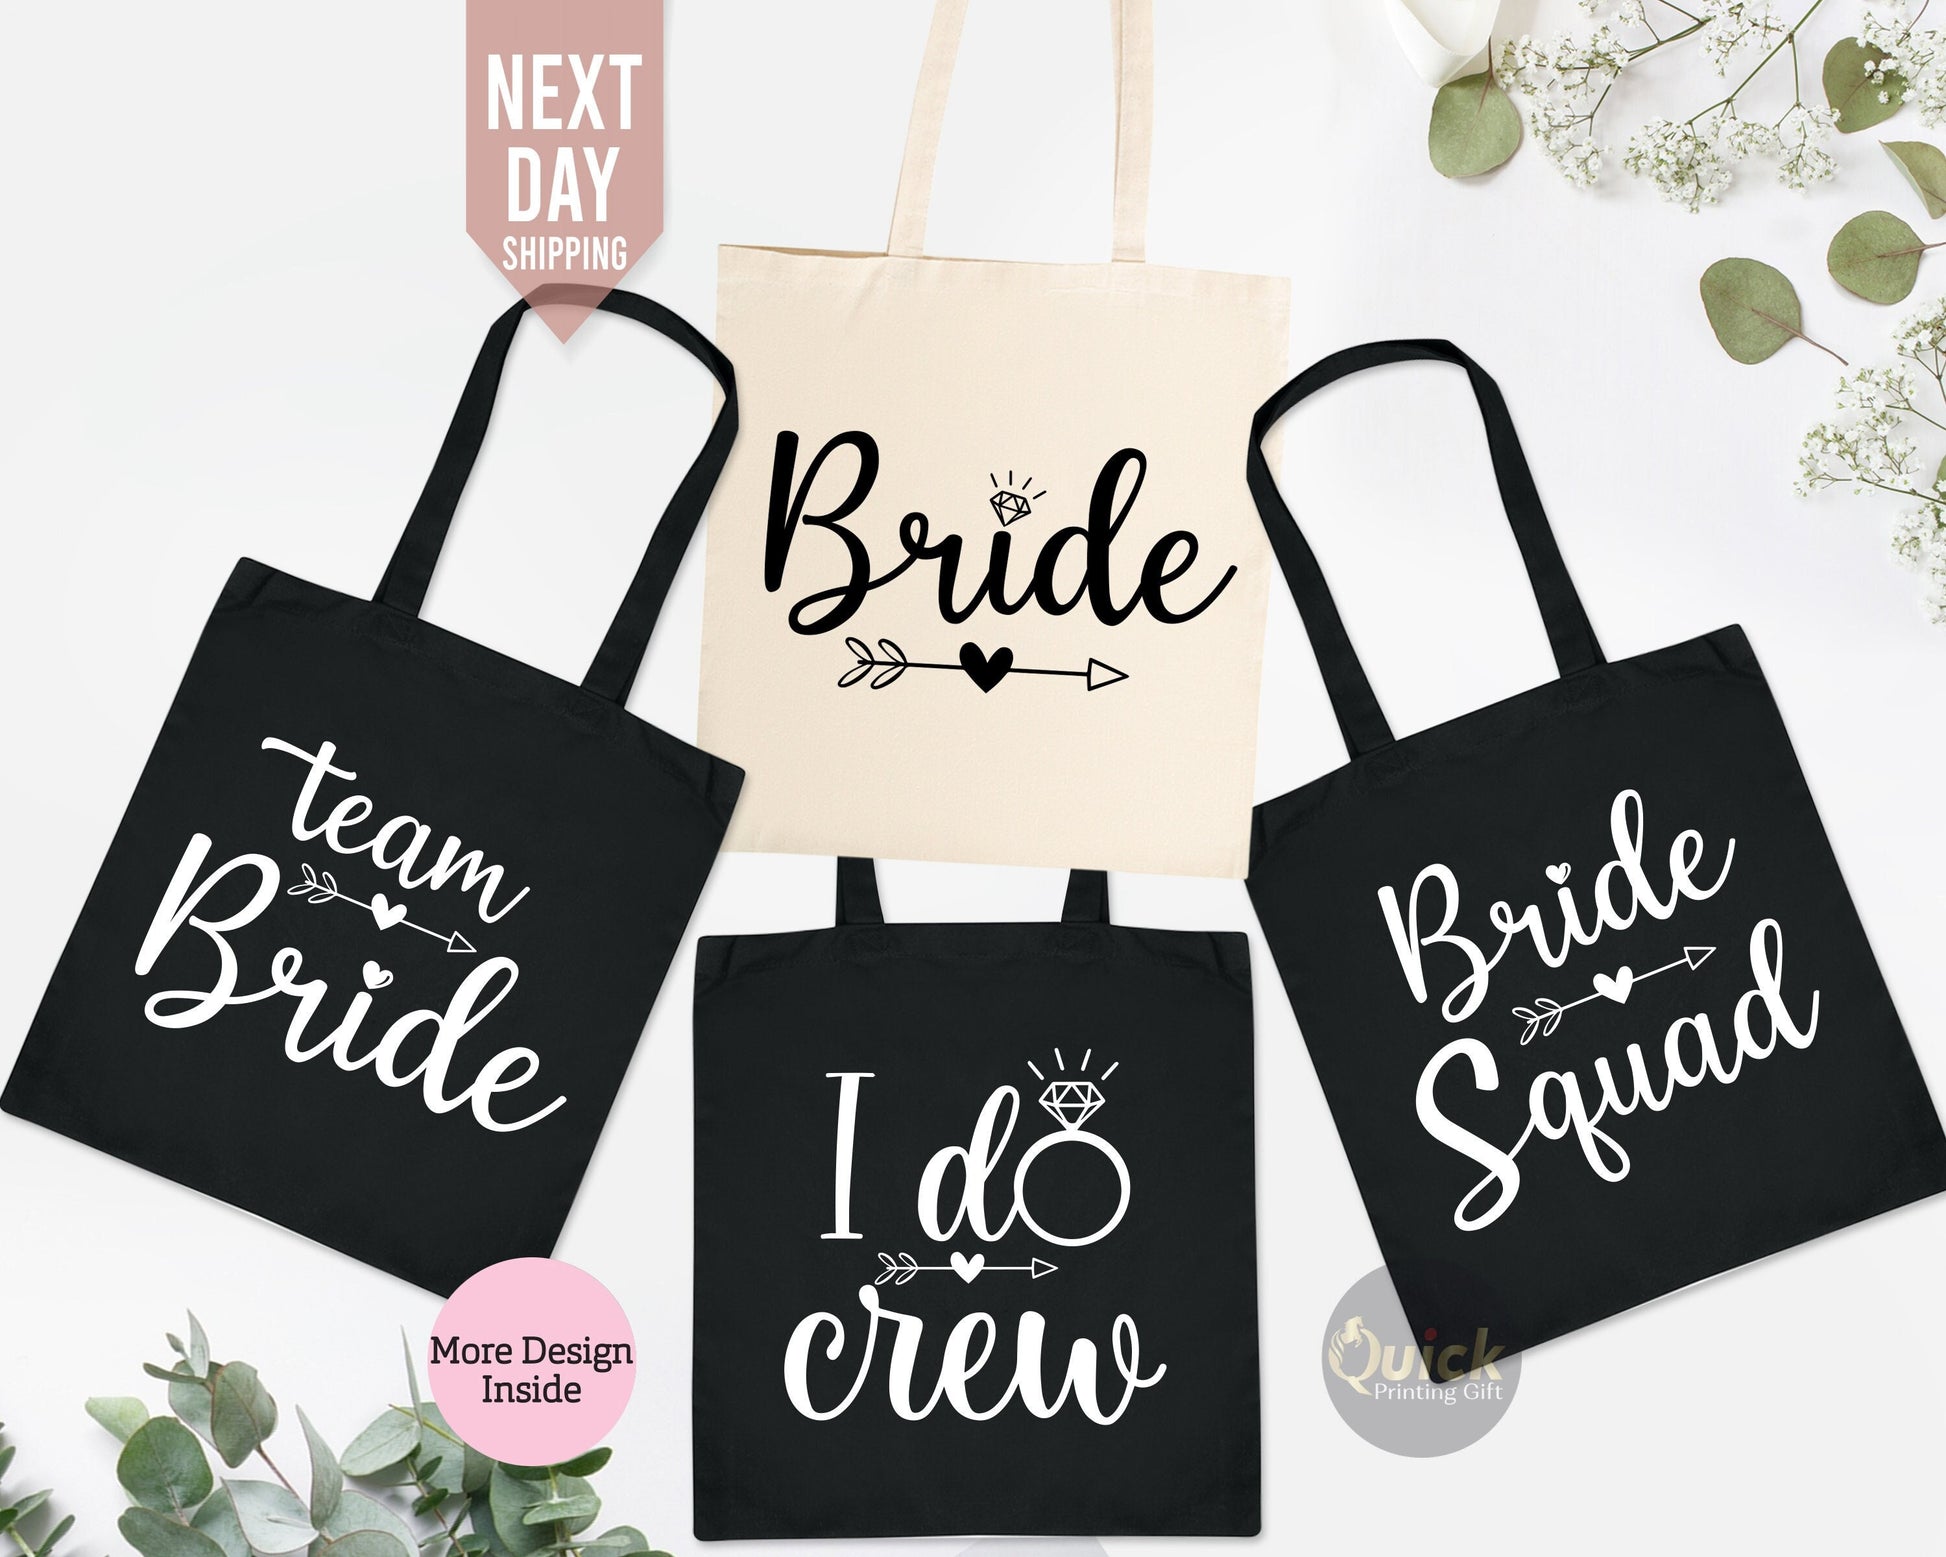 Personalized Wedding Tote Bags